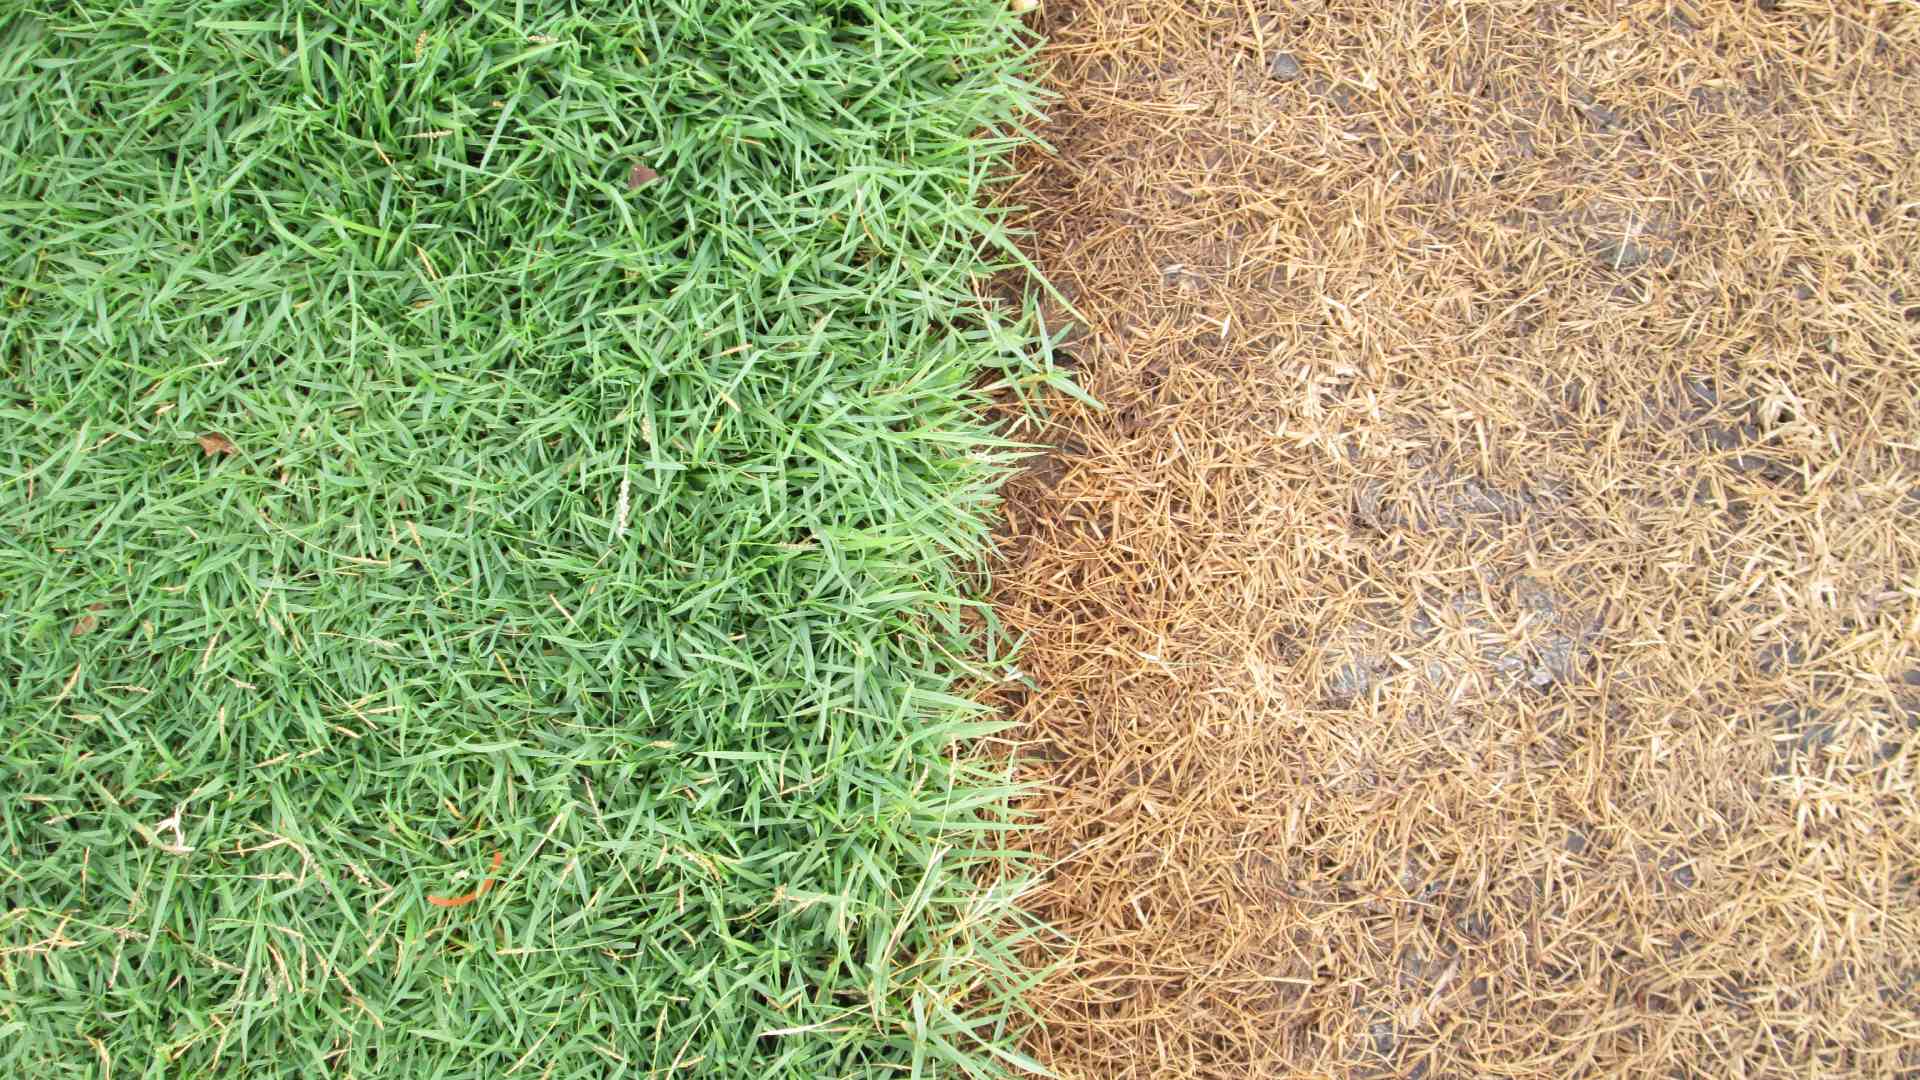 Fertilization & Weed Control - Why You Shouldn’t Do One Without the Other